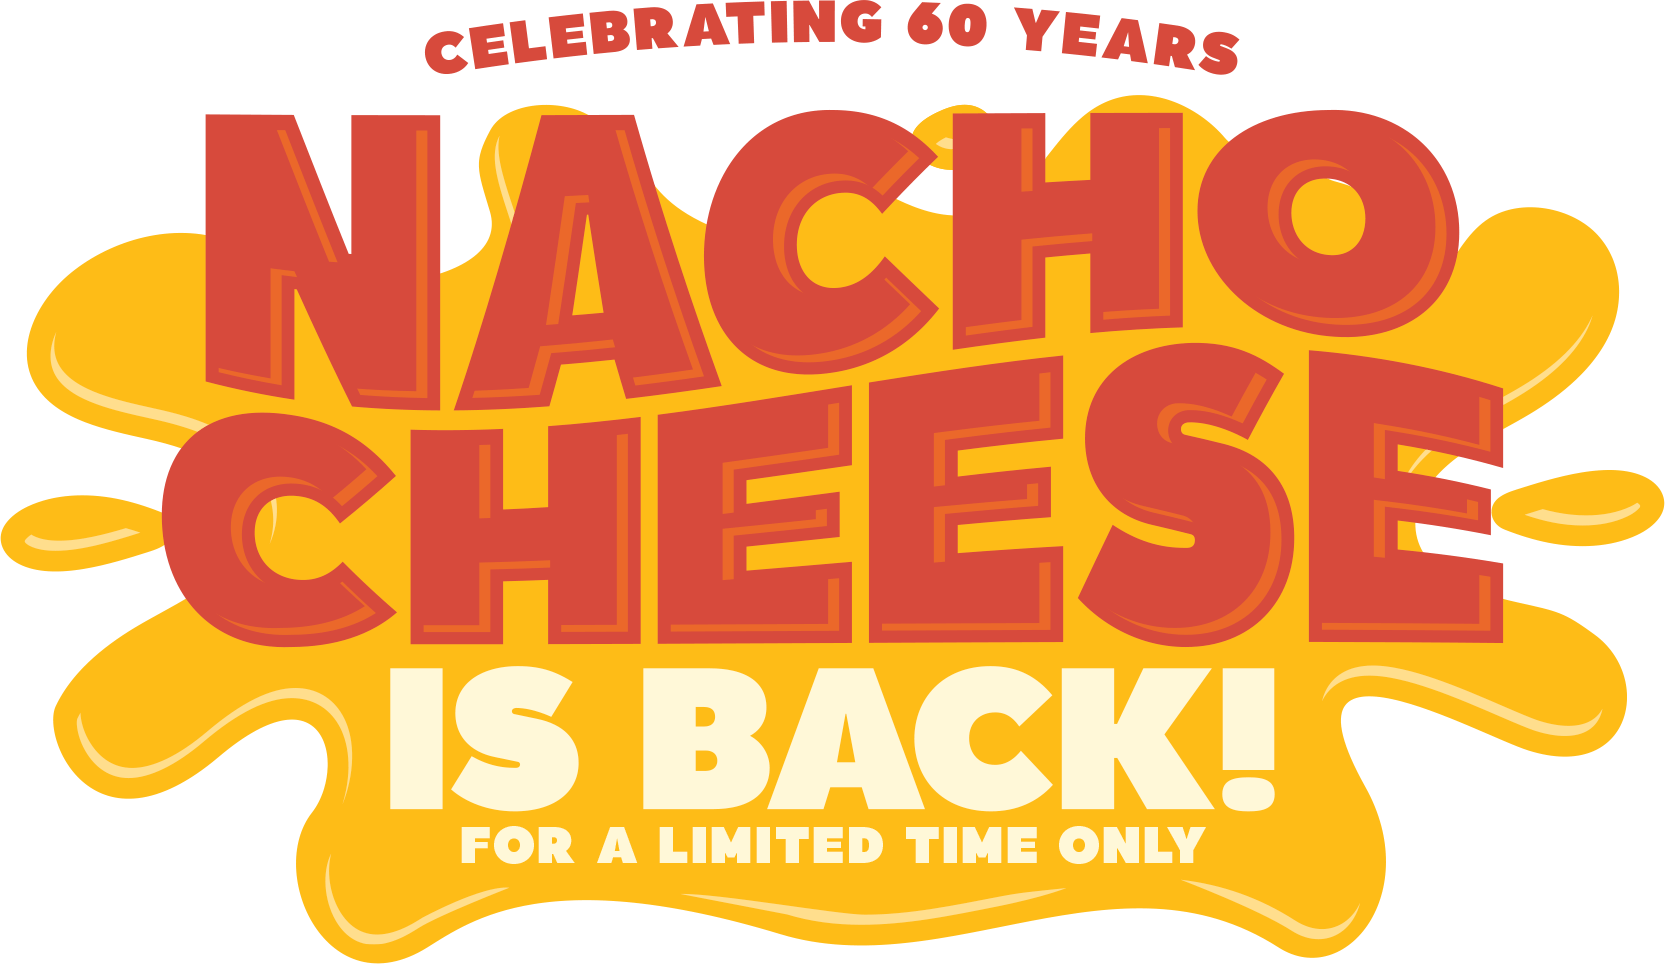 Celebrating 60 Years Nacho Cheese is Back! For a Limited Time Only